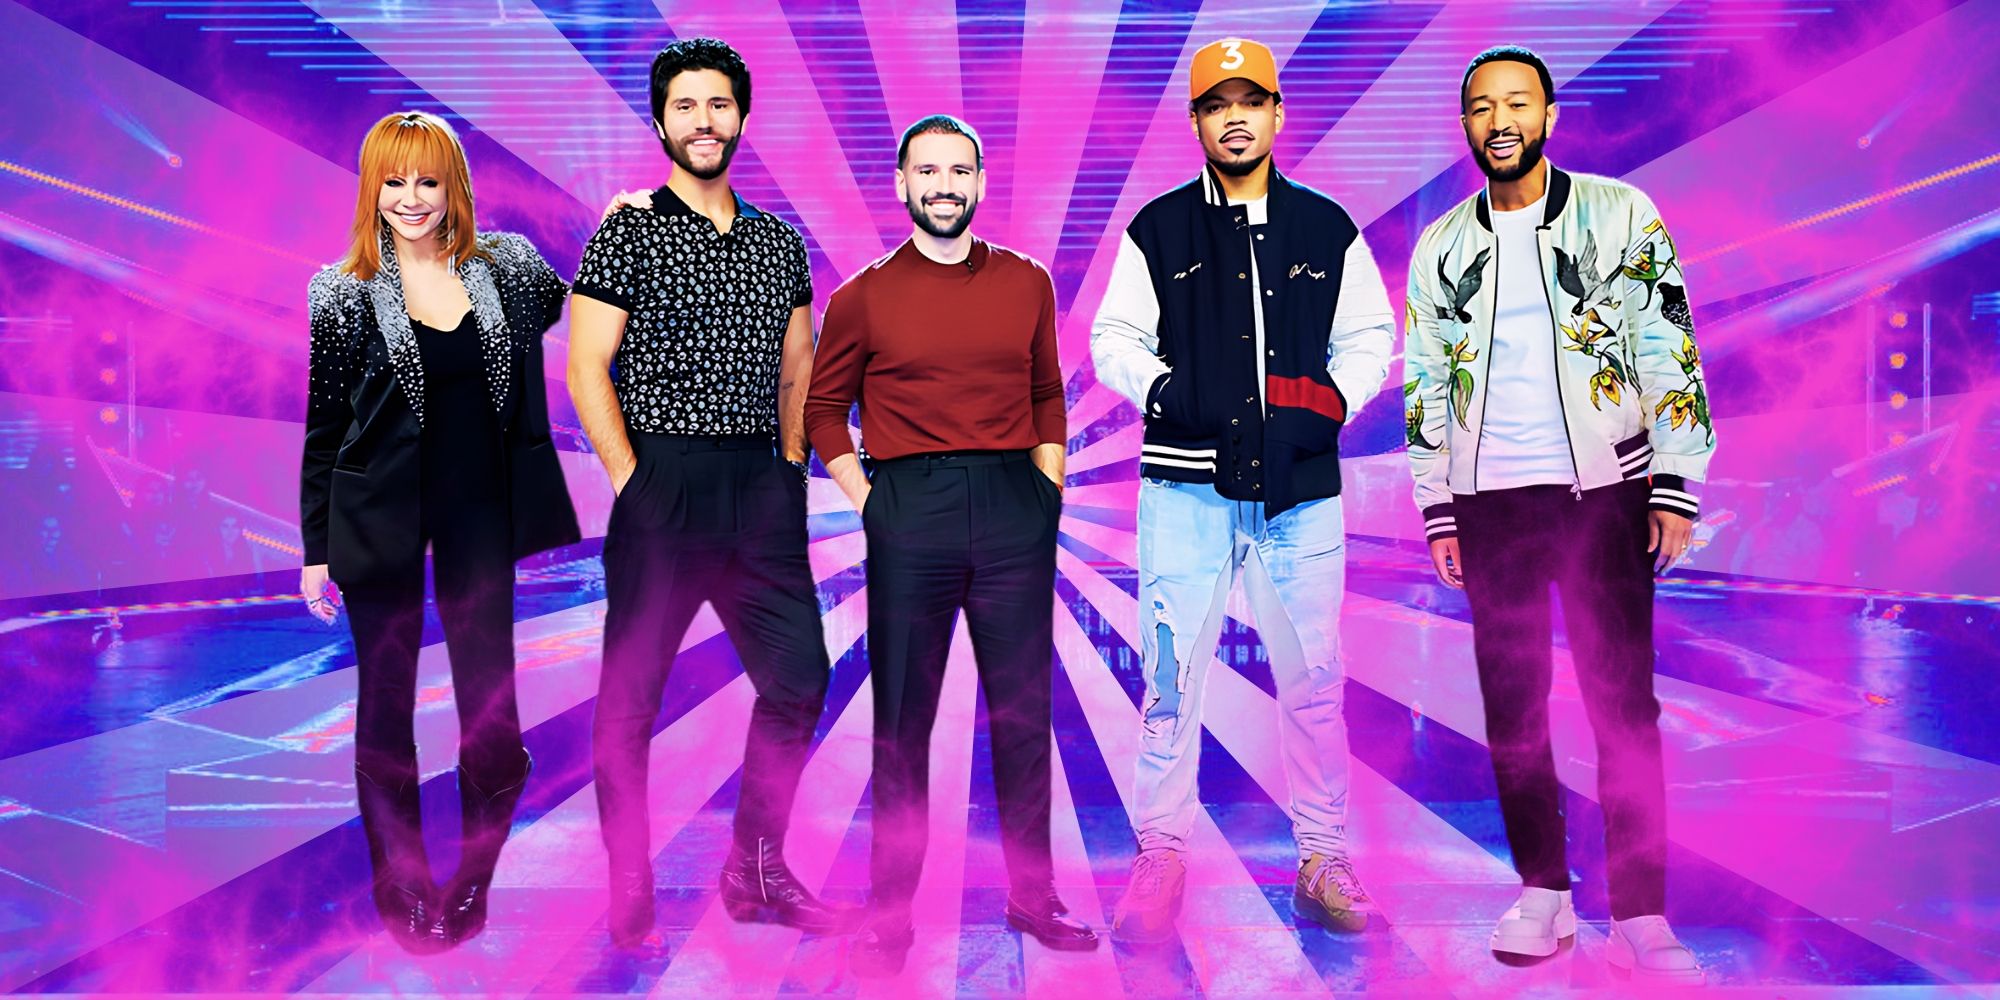 the voice judges including john legend and chance the rapper reba mcintyre montage with pink and blue background